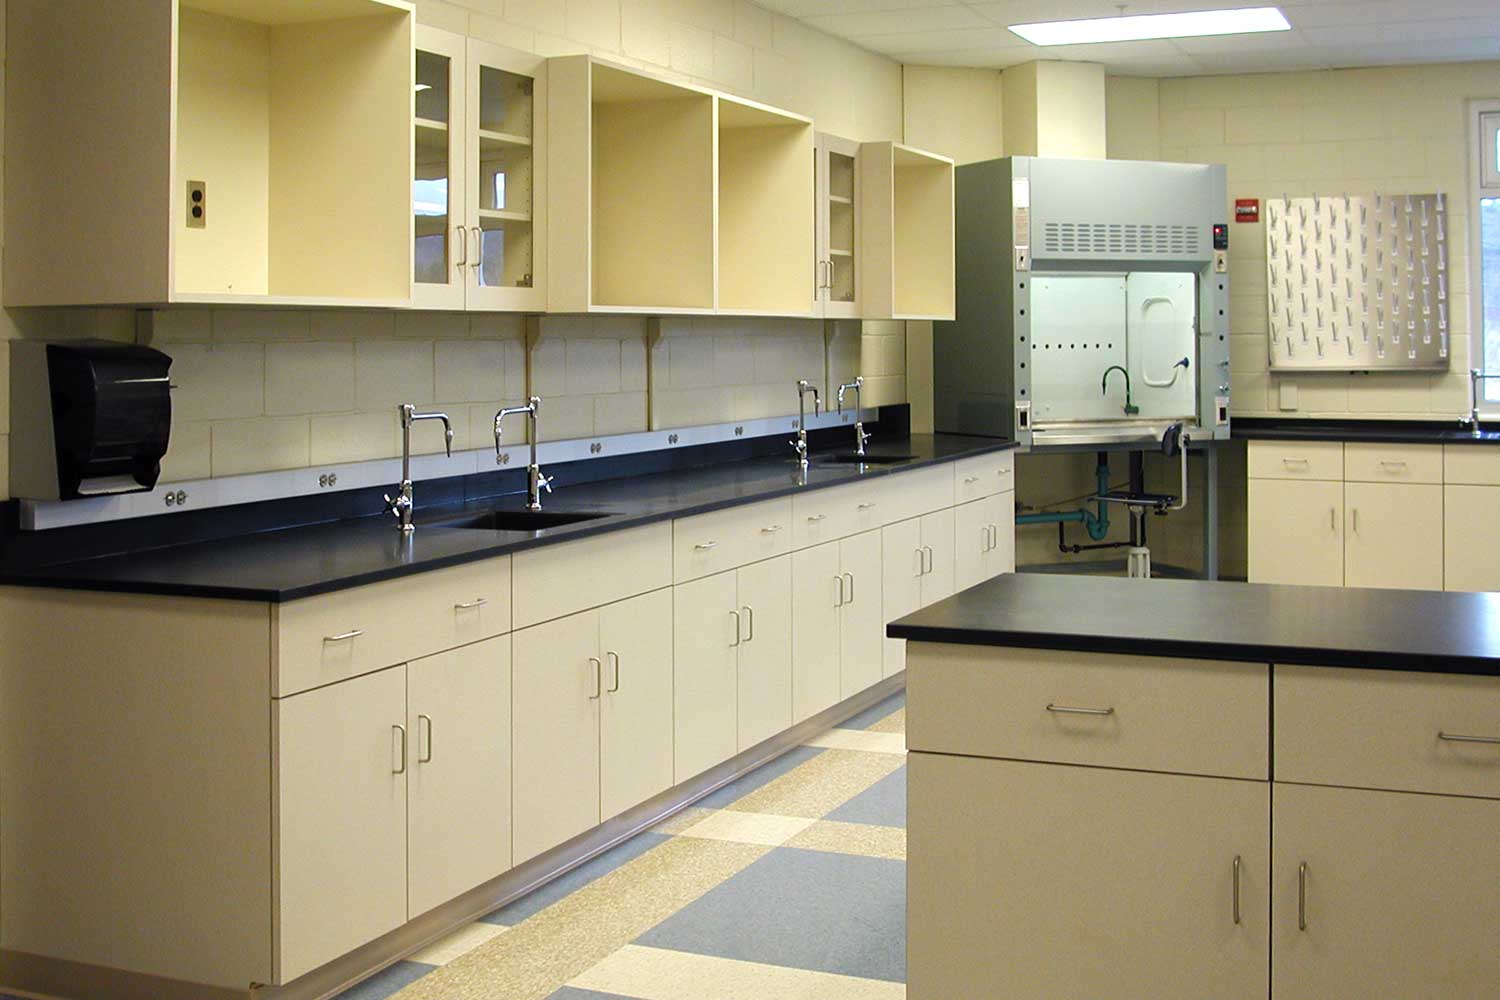 plastic laminate cabinets Commercial Casework and Cabinets